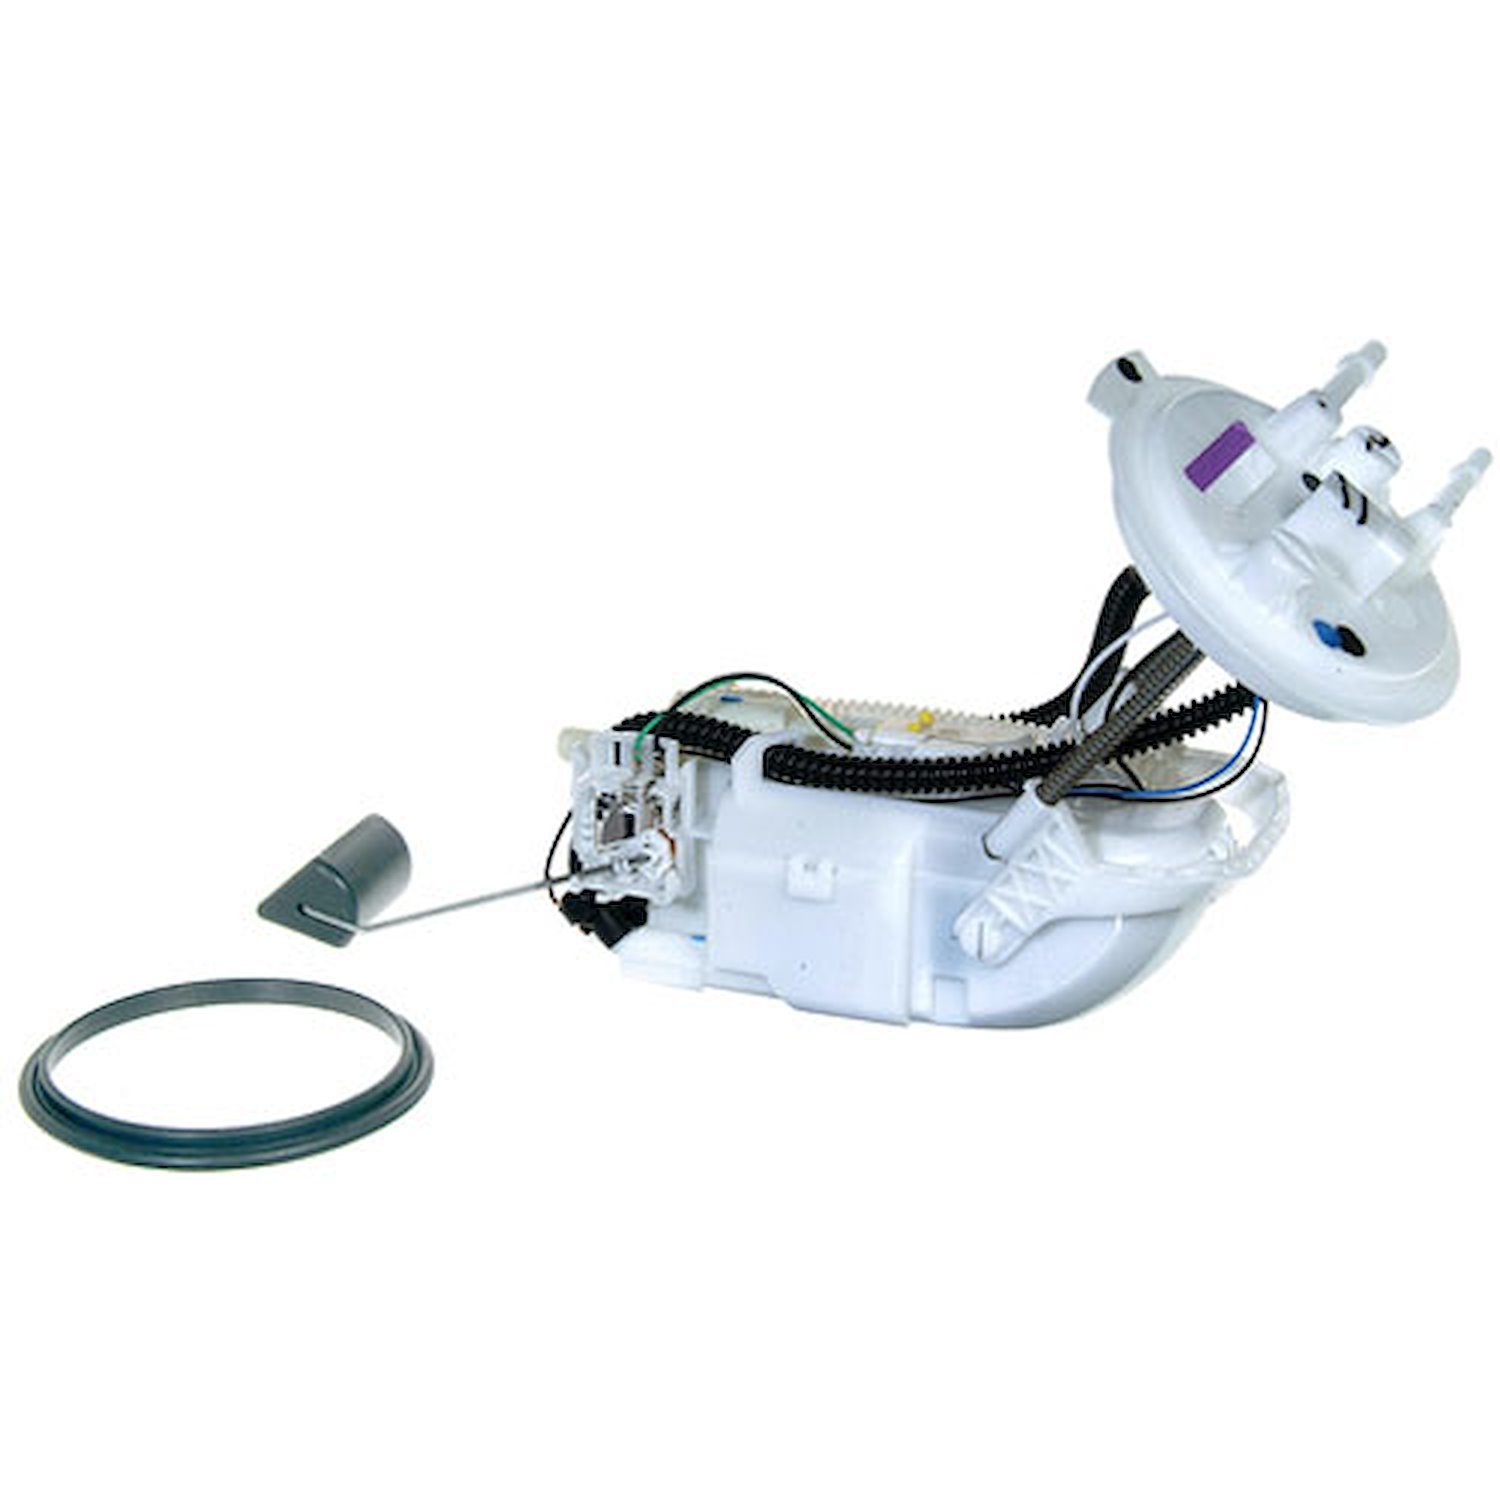 OE GM Replacement Electric Fuel Pump Module Assembly 2003-04 Cadillac CTS/STS 2.8L V6/3.6L V6/4.4L V8/4.6L V8/5.7L V8/6.0L V8